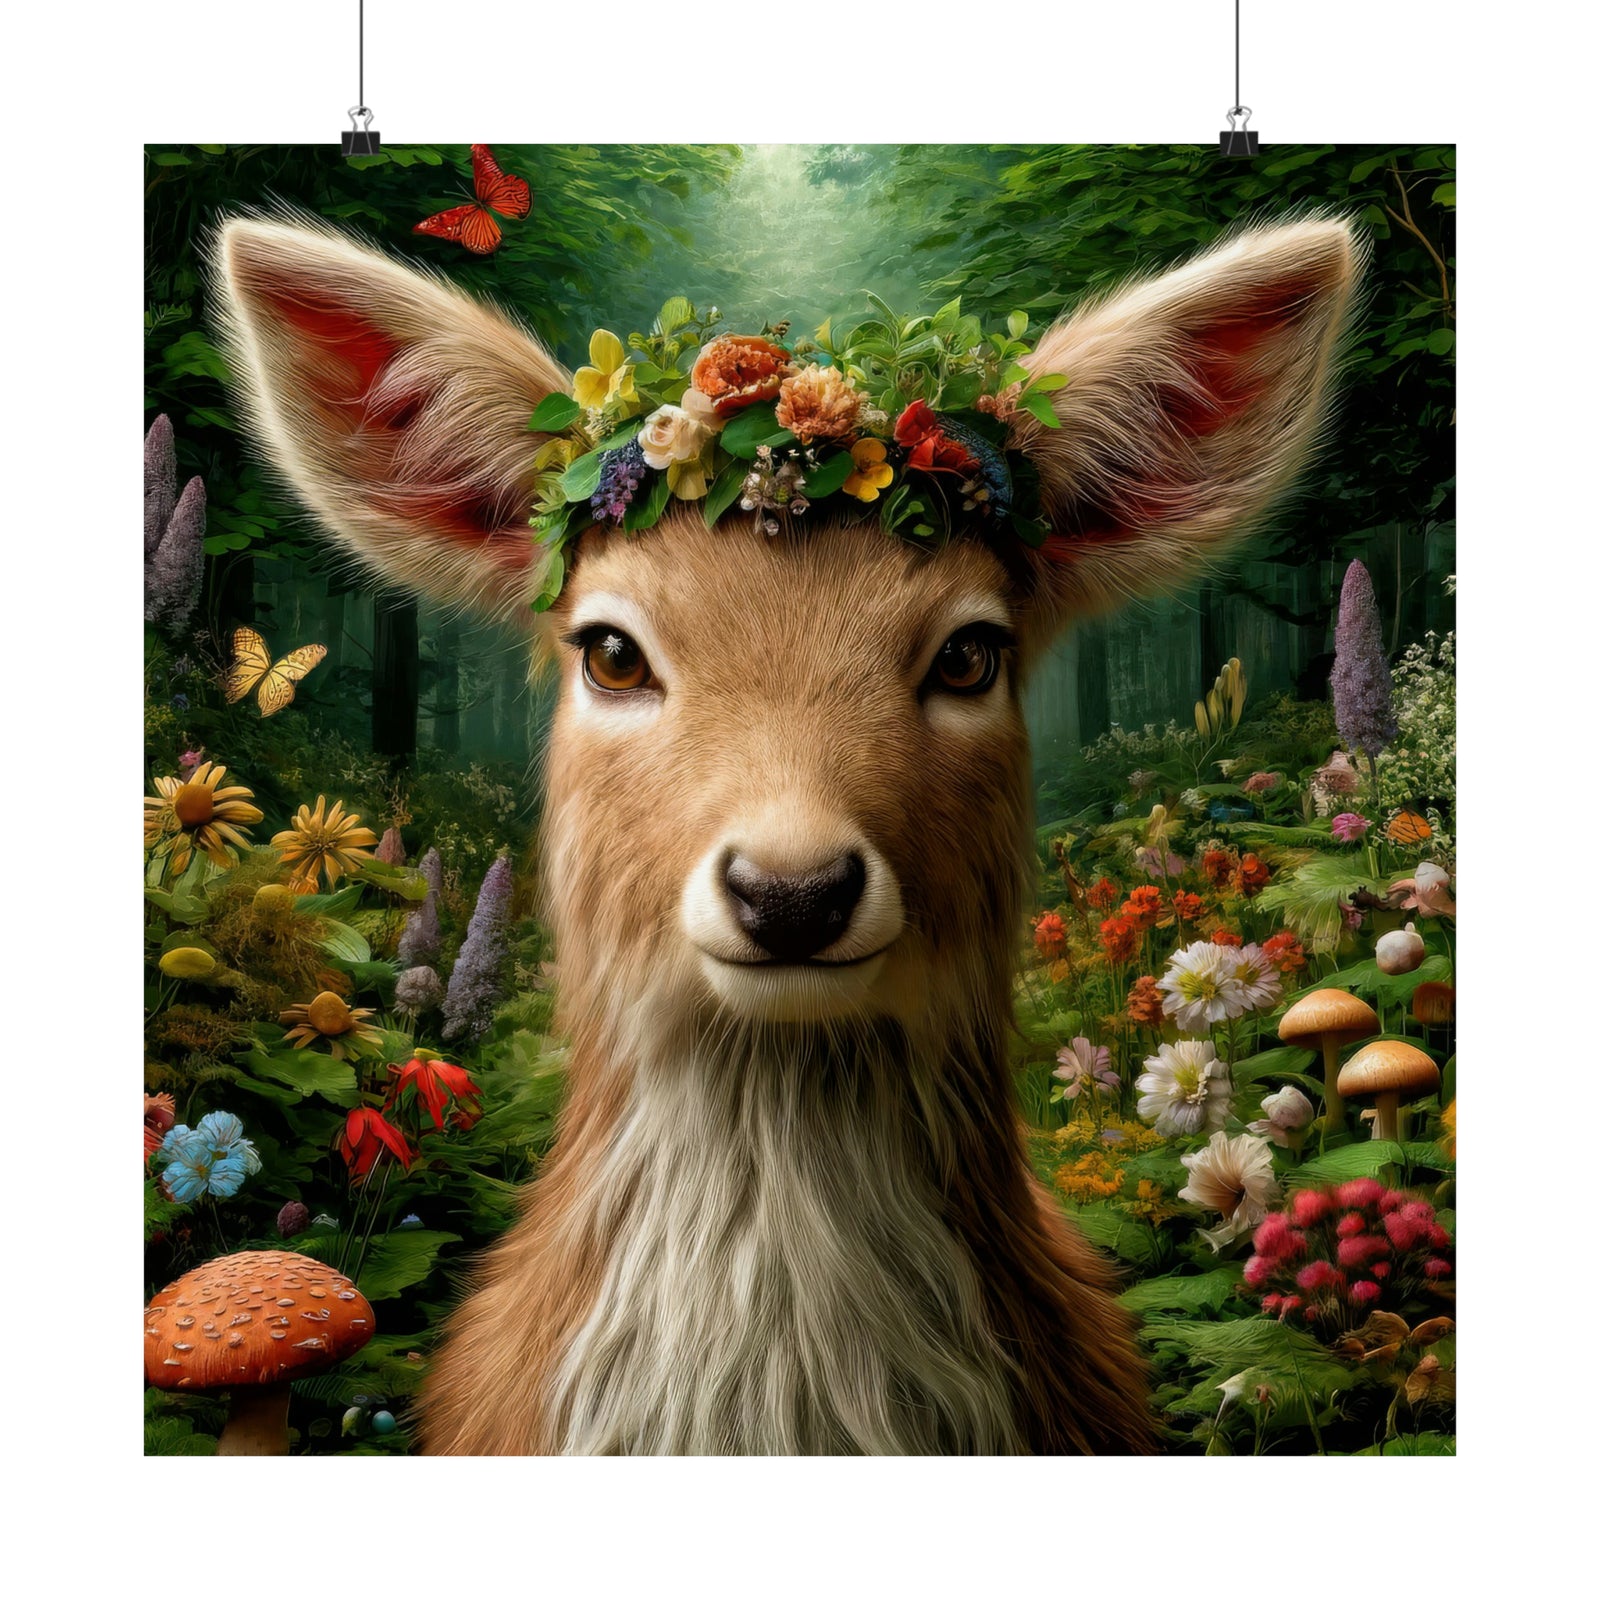 Forest Fawn's Floral Halo Poster